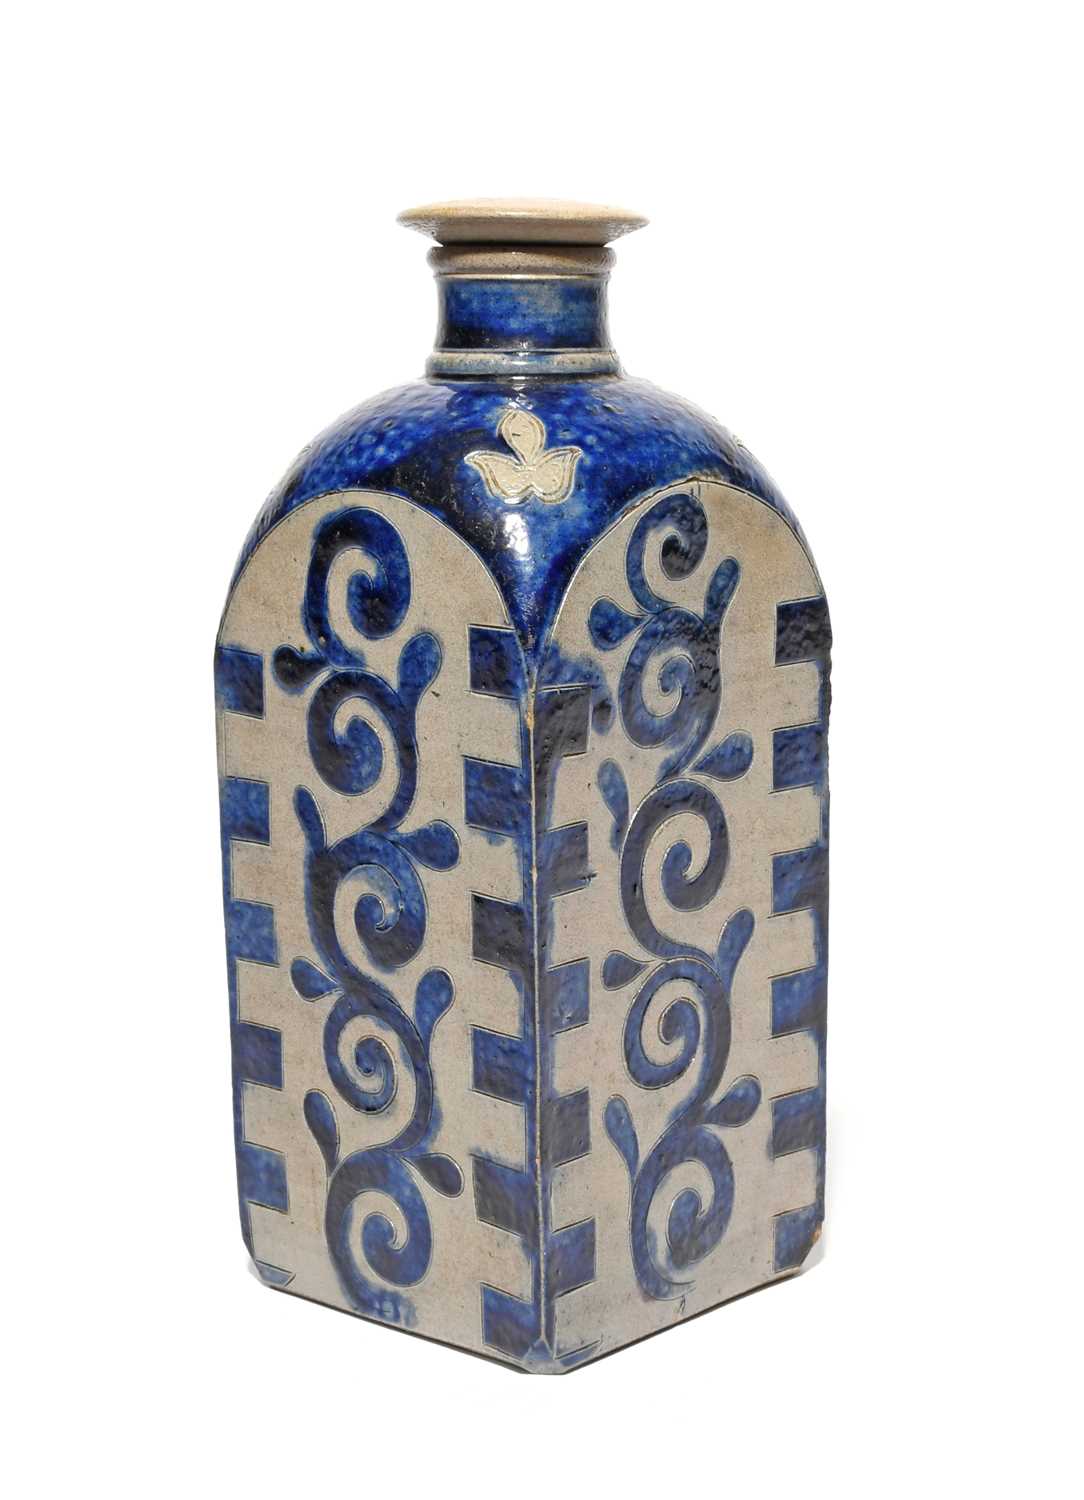 A Westerwald stoneware square flask or bottle and stopper, early 18th century, the four sides each